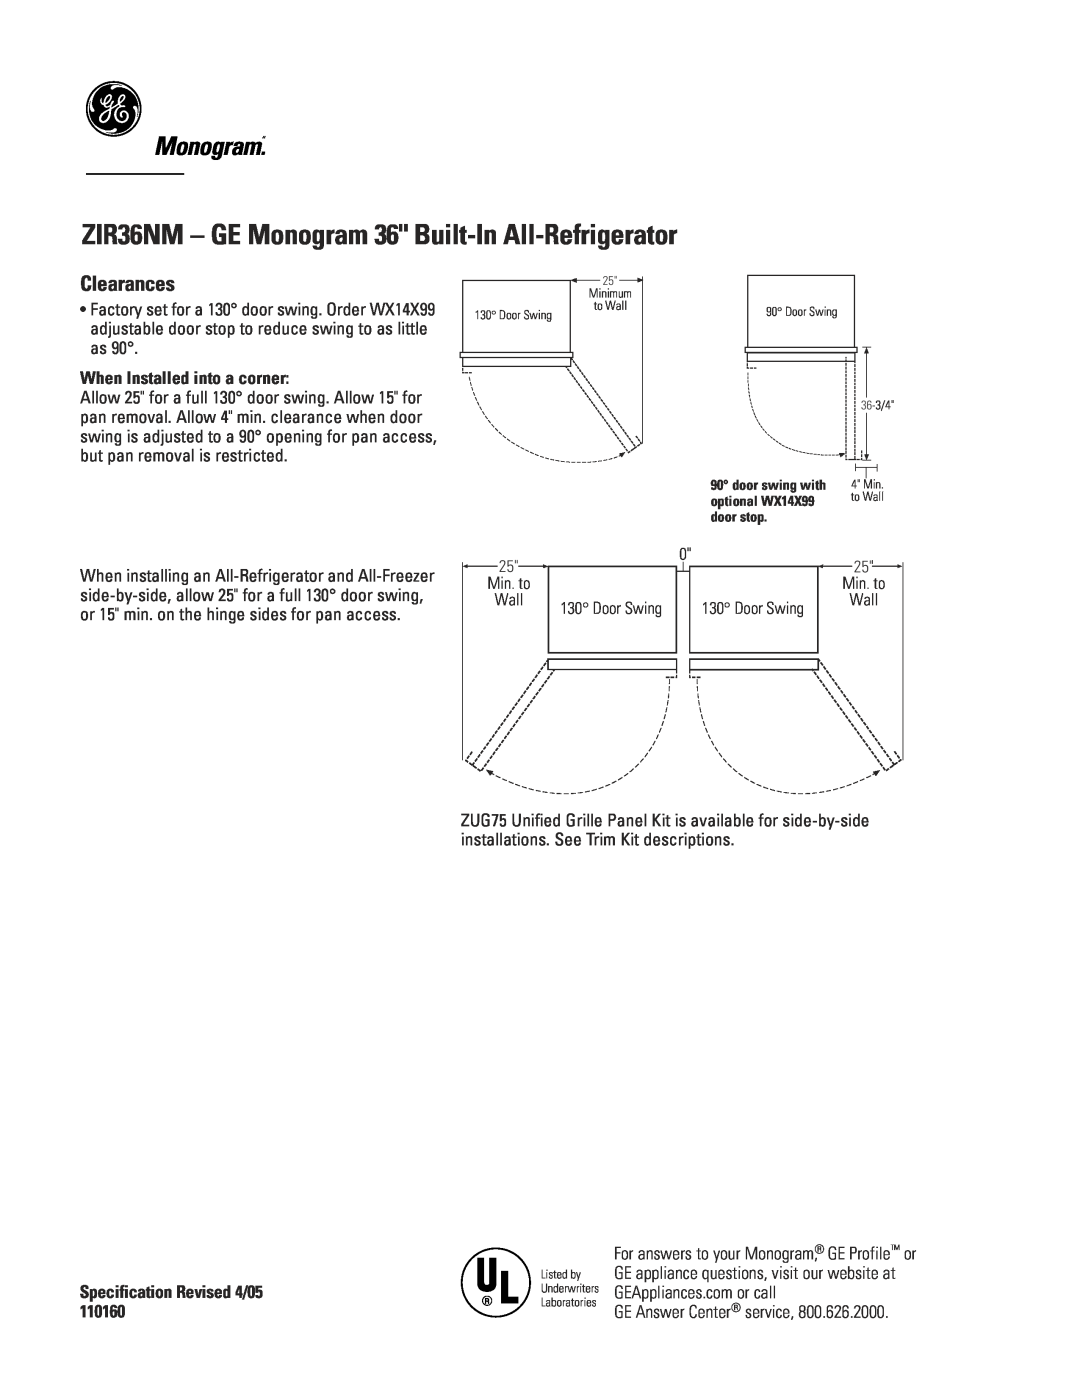 GE dimensions ZIR36NM - GE Monogram 36 Built-In All-Refrigerator, Monogram.“, Clearances, When Installed into a corner 